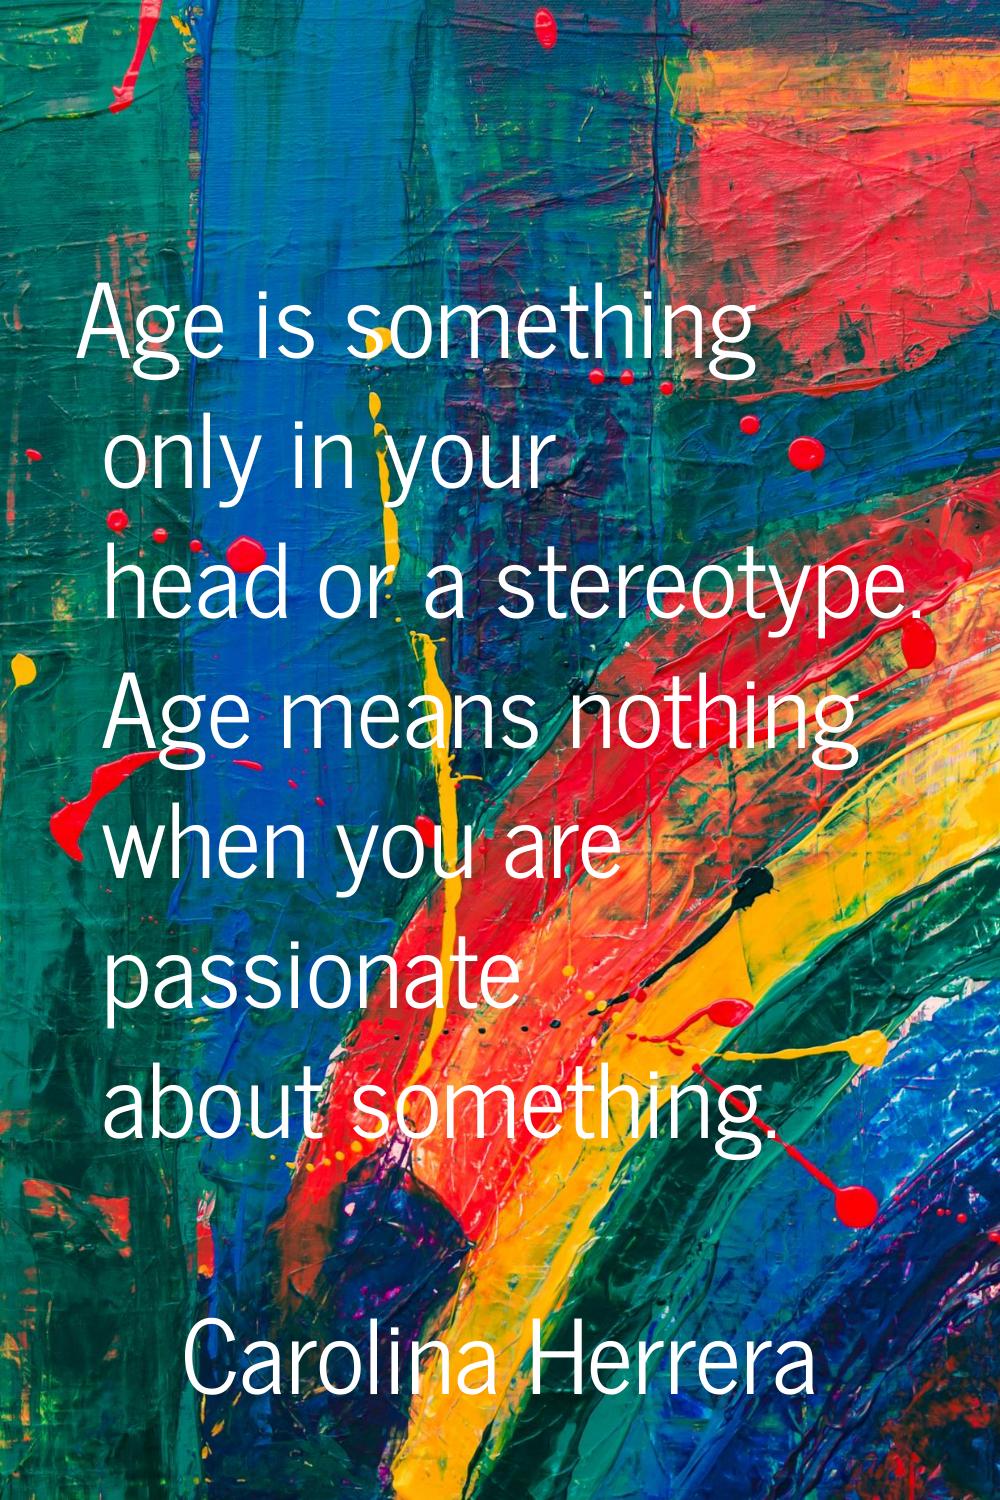 Age is something only in your head or a stereotype. Age means nothing when you are passionate about